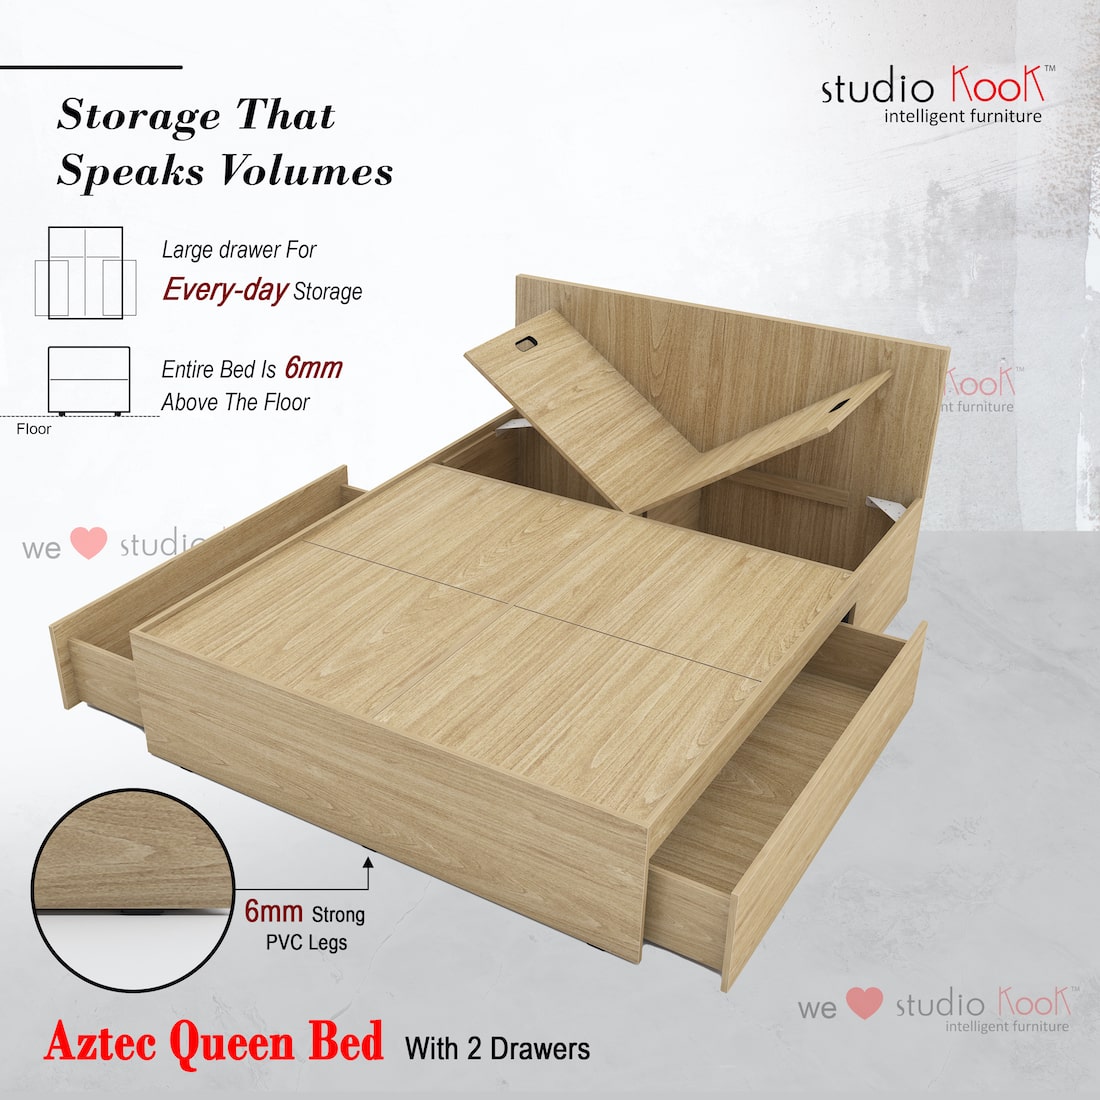 Aztec Queen Bed with 2 Drawers